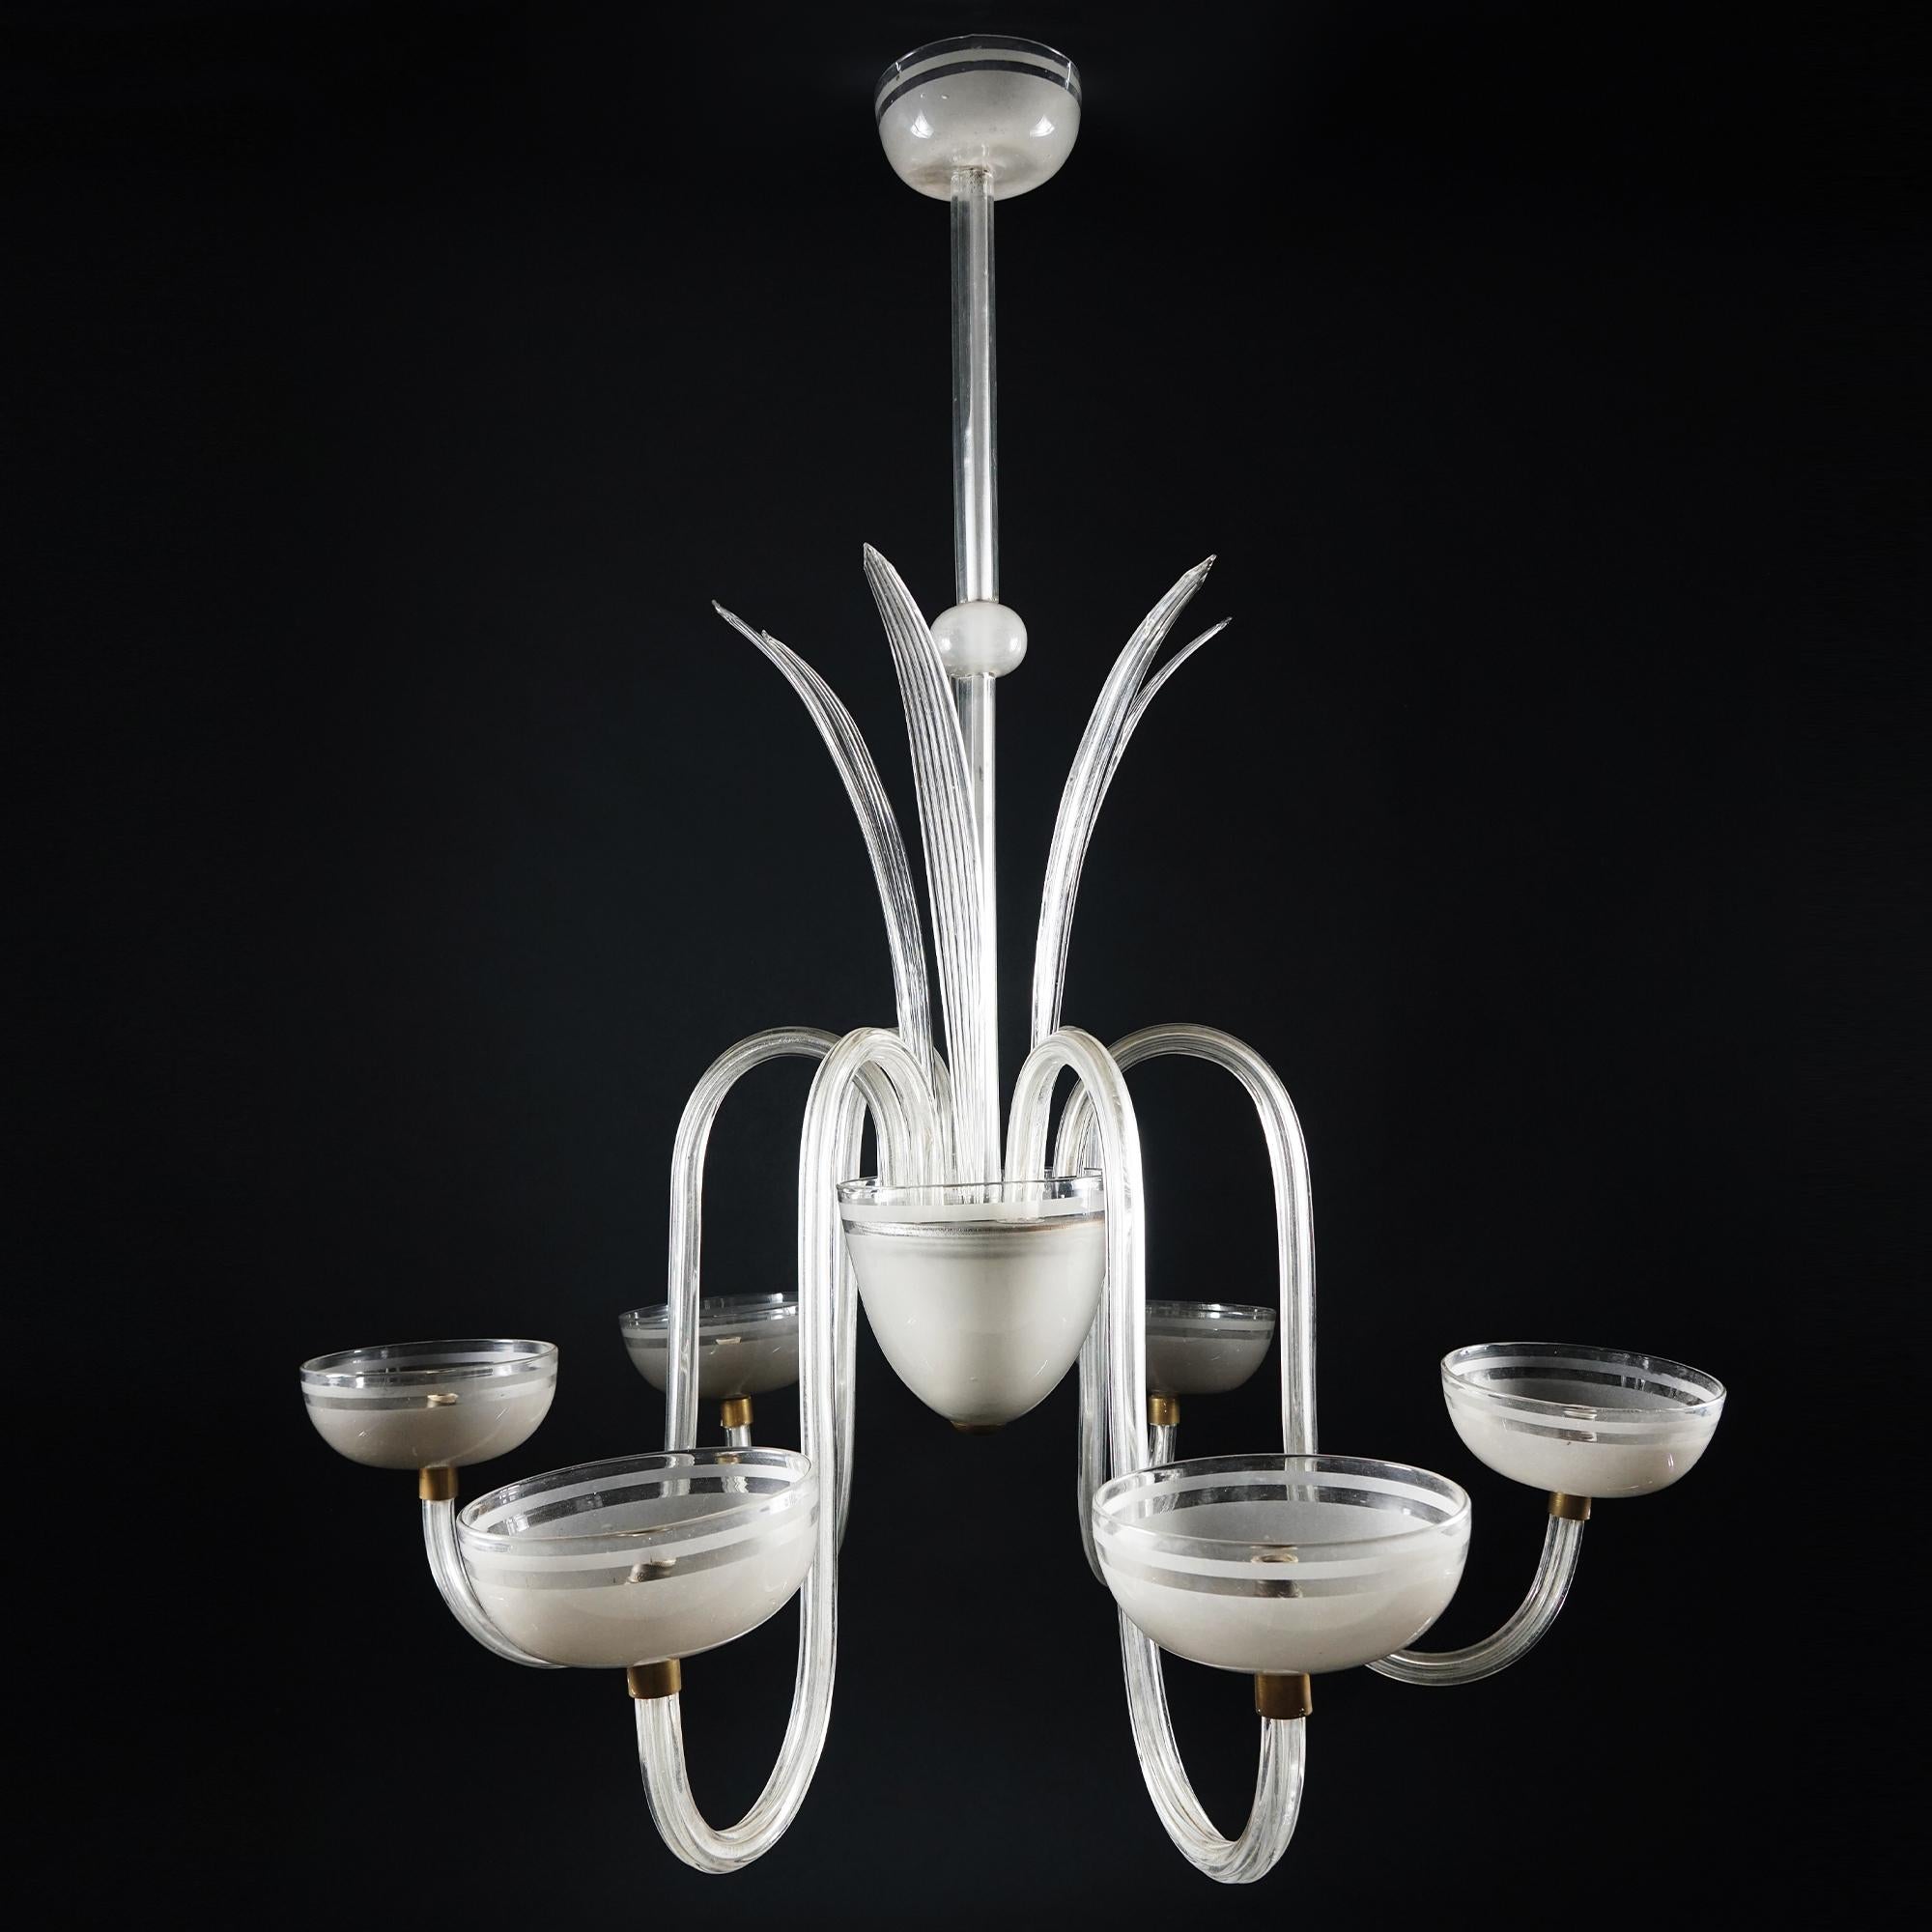 Venini chandelier in partly frosted clear glass with six lights emerging from scroll arms; linear stem, six leaves pointing upward. Piece of great refinement. In the background works by Taeko MIma.